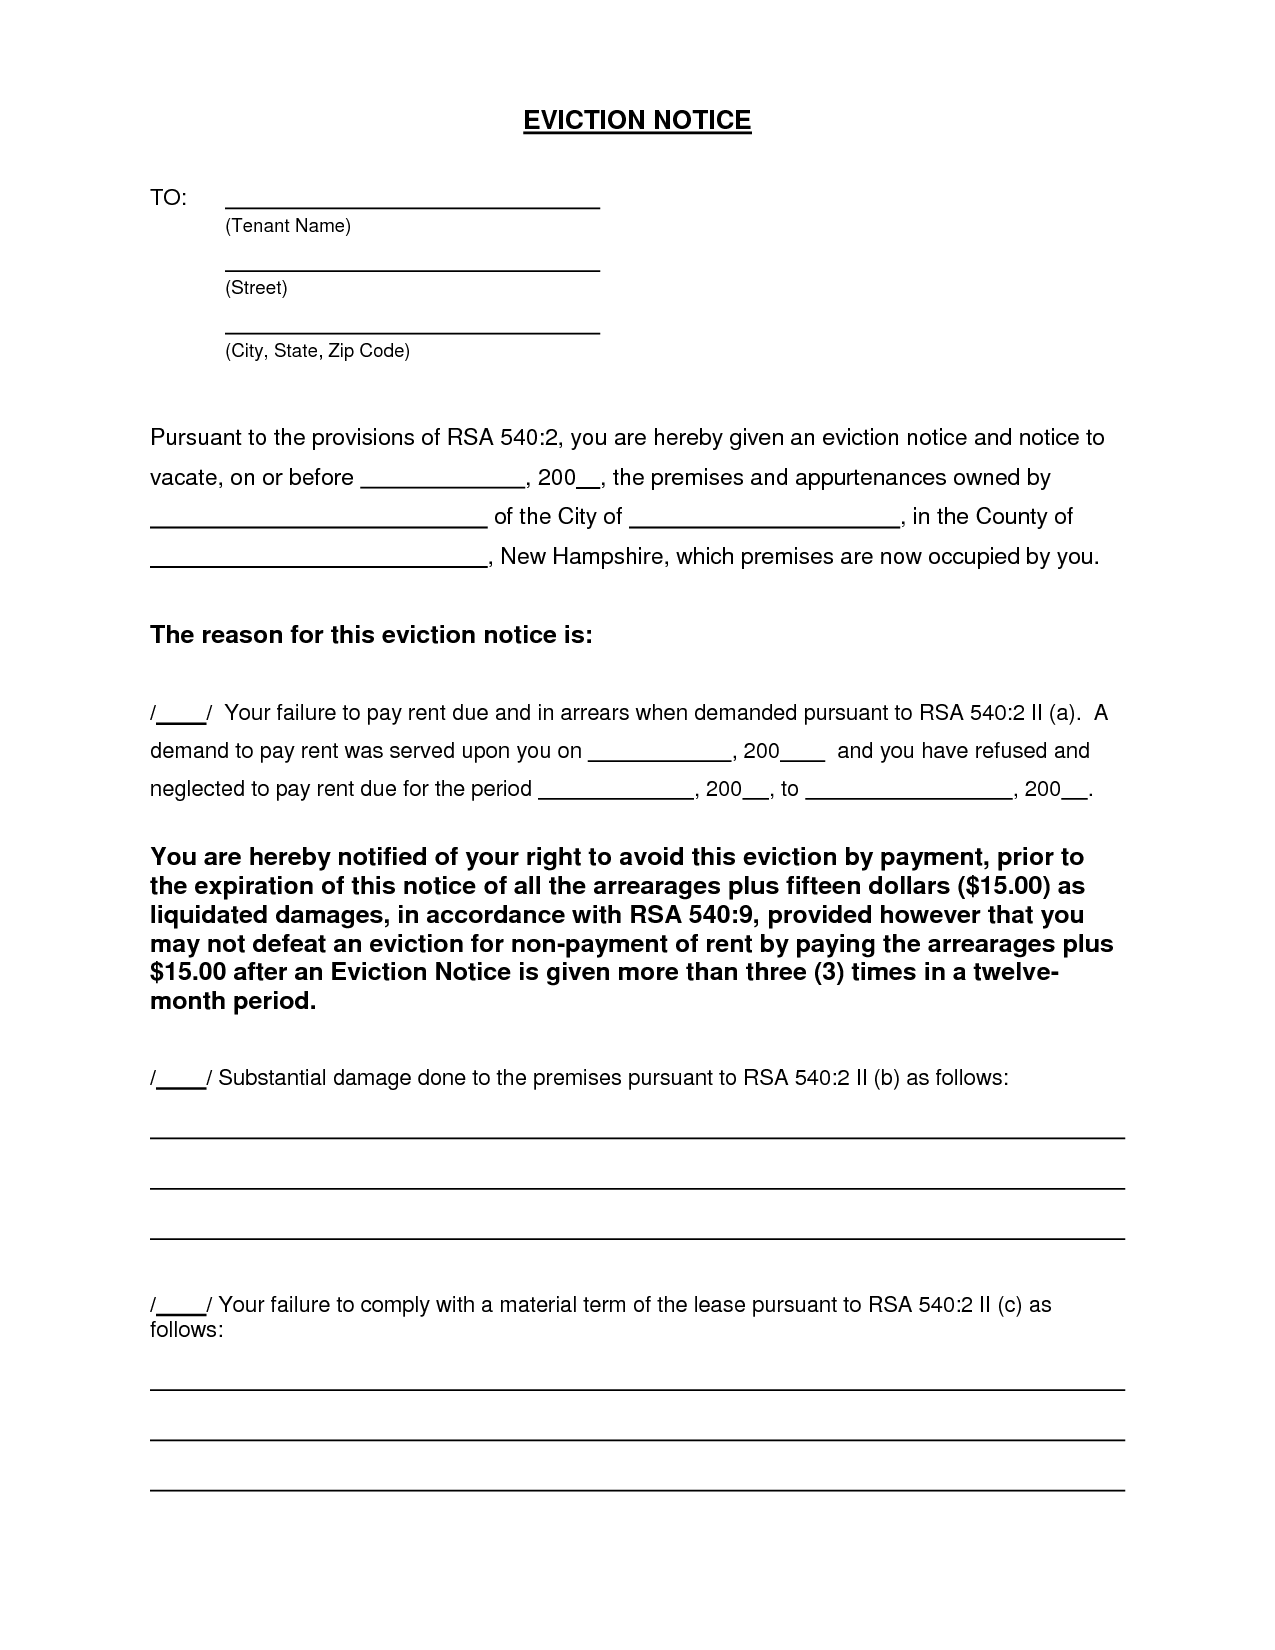 eviction-notice-for-roommate-free-printable-documents